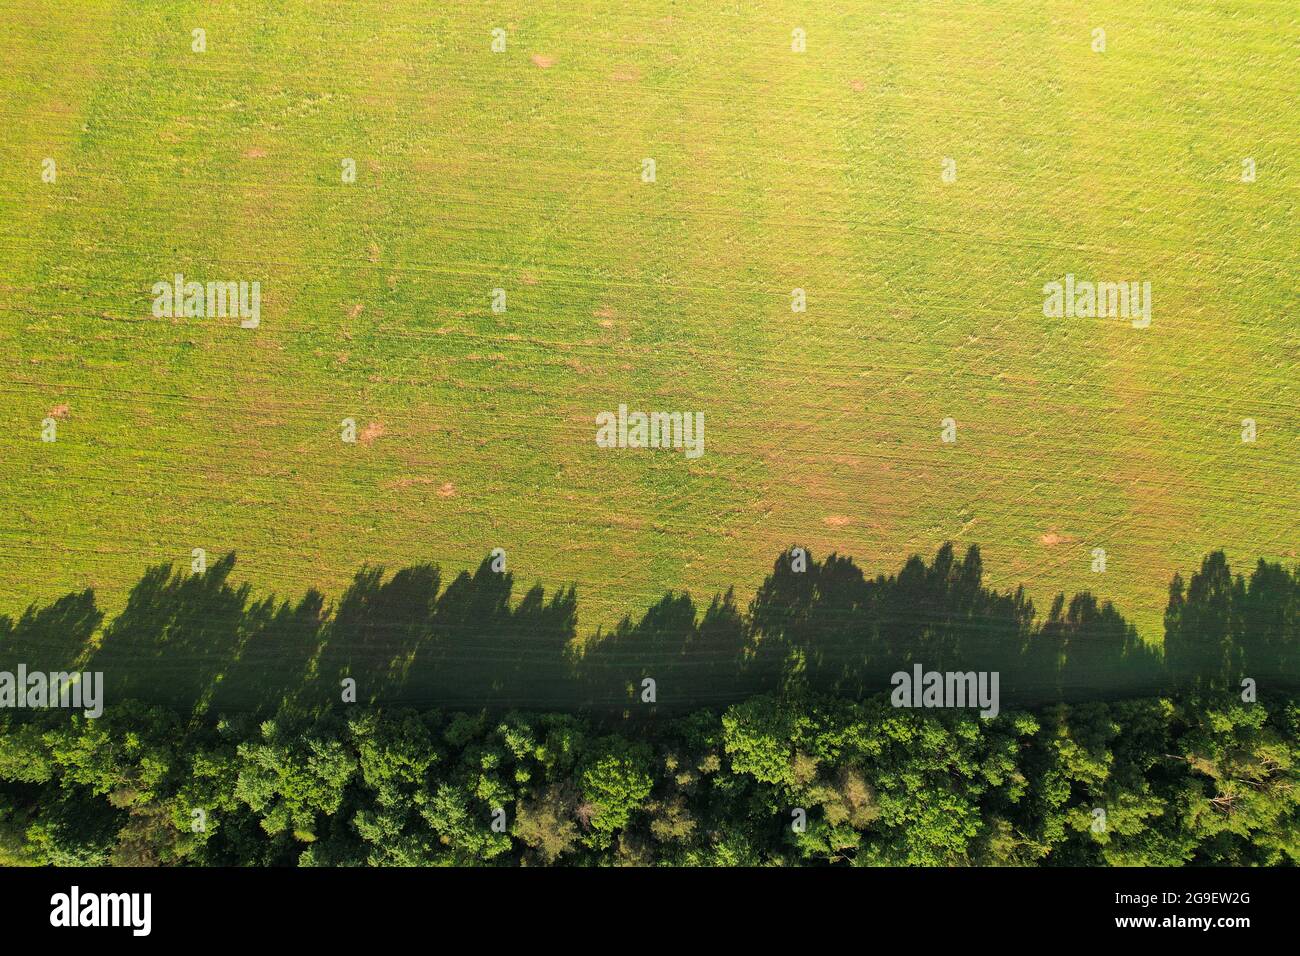 Garden protection plantings along farmland with young crops. Shadow of plants and shrubs falls on the field. Aerial view Stock Photo